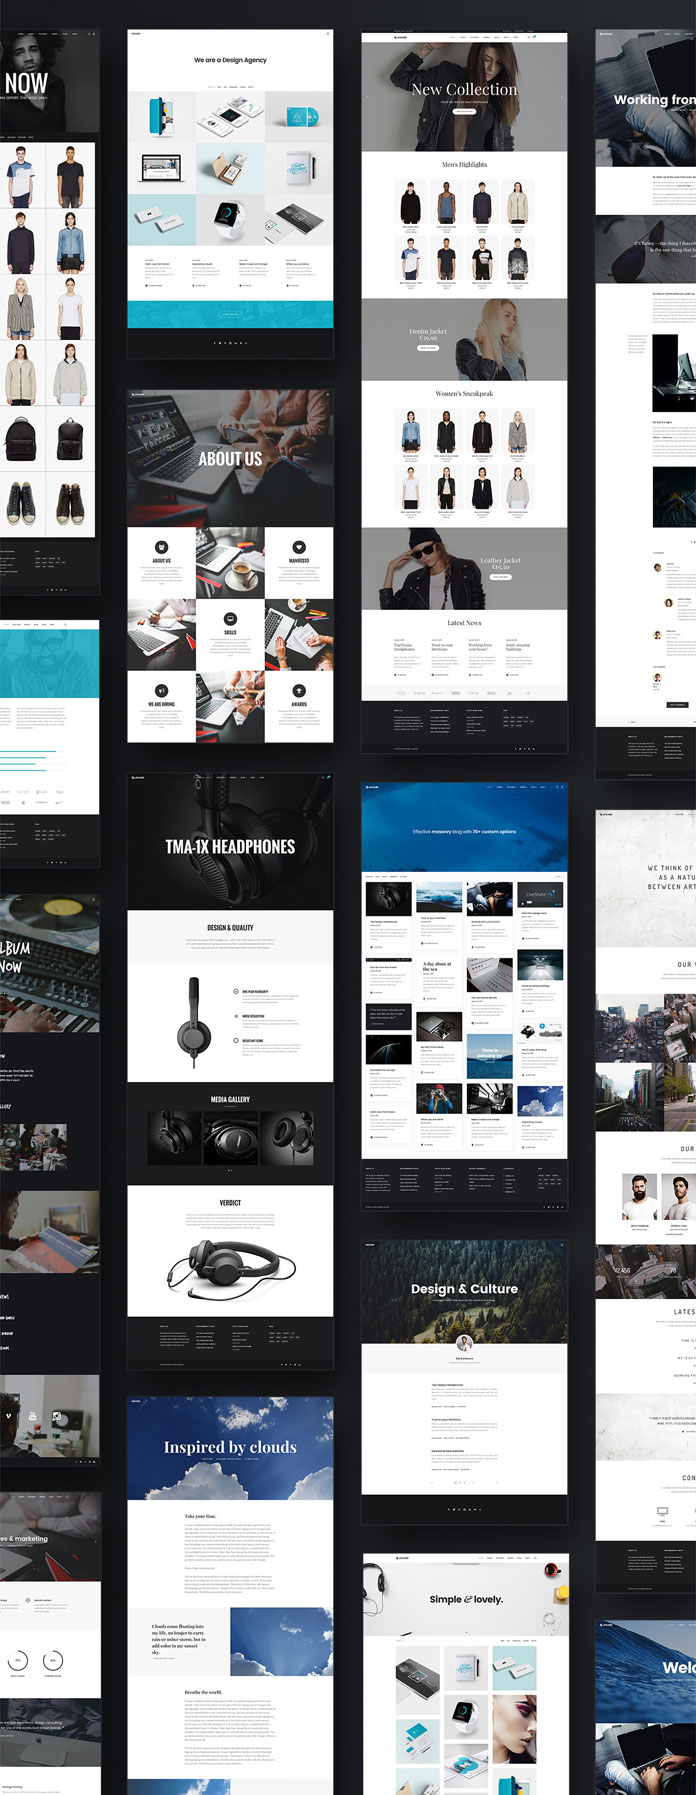 One WordPress theme that lets you create countless layouts.